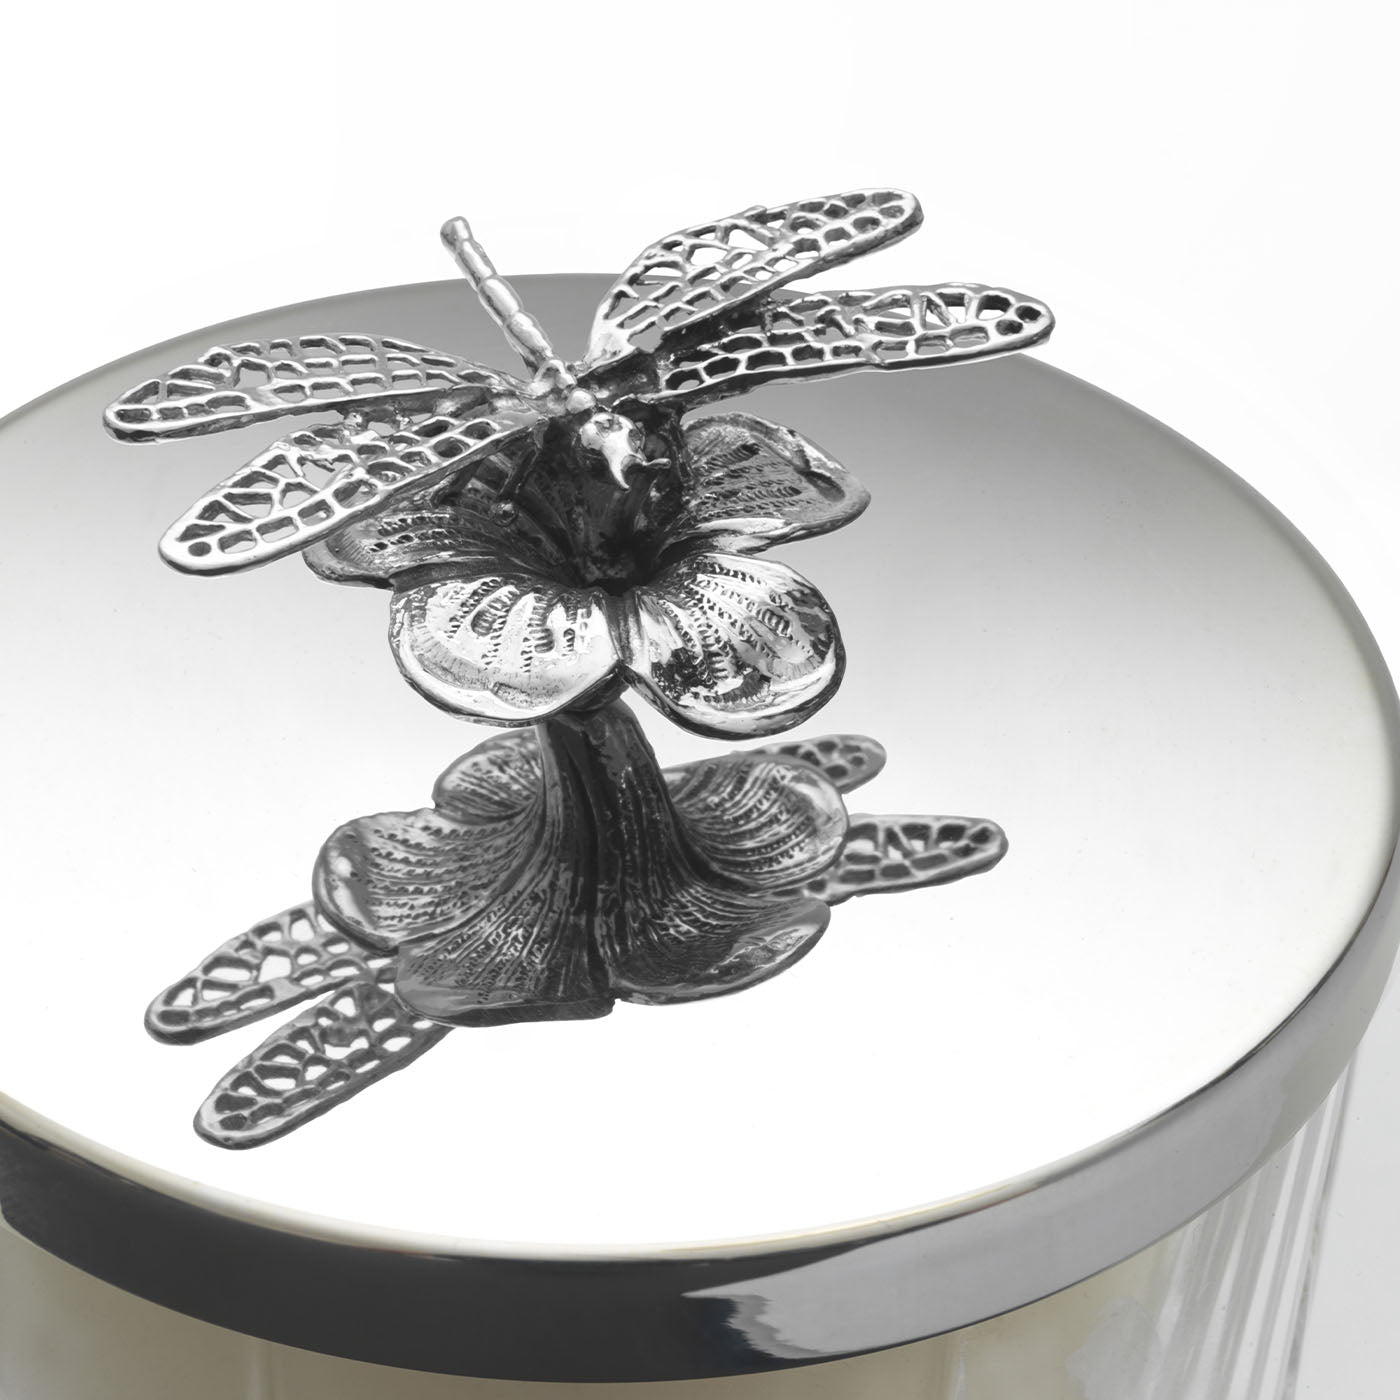 Spring Dragonfly Candle Vase with Lid - Alternative view 1